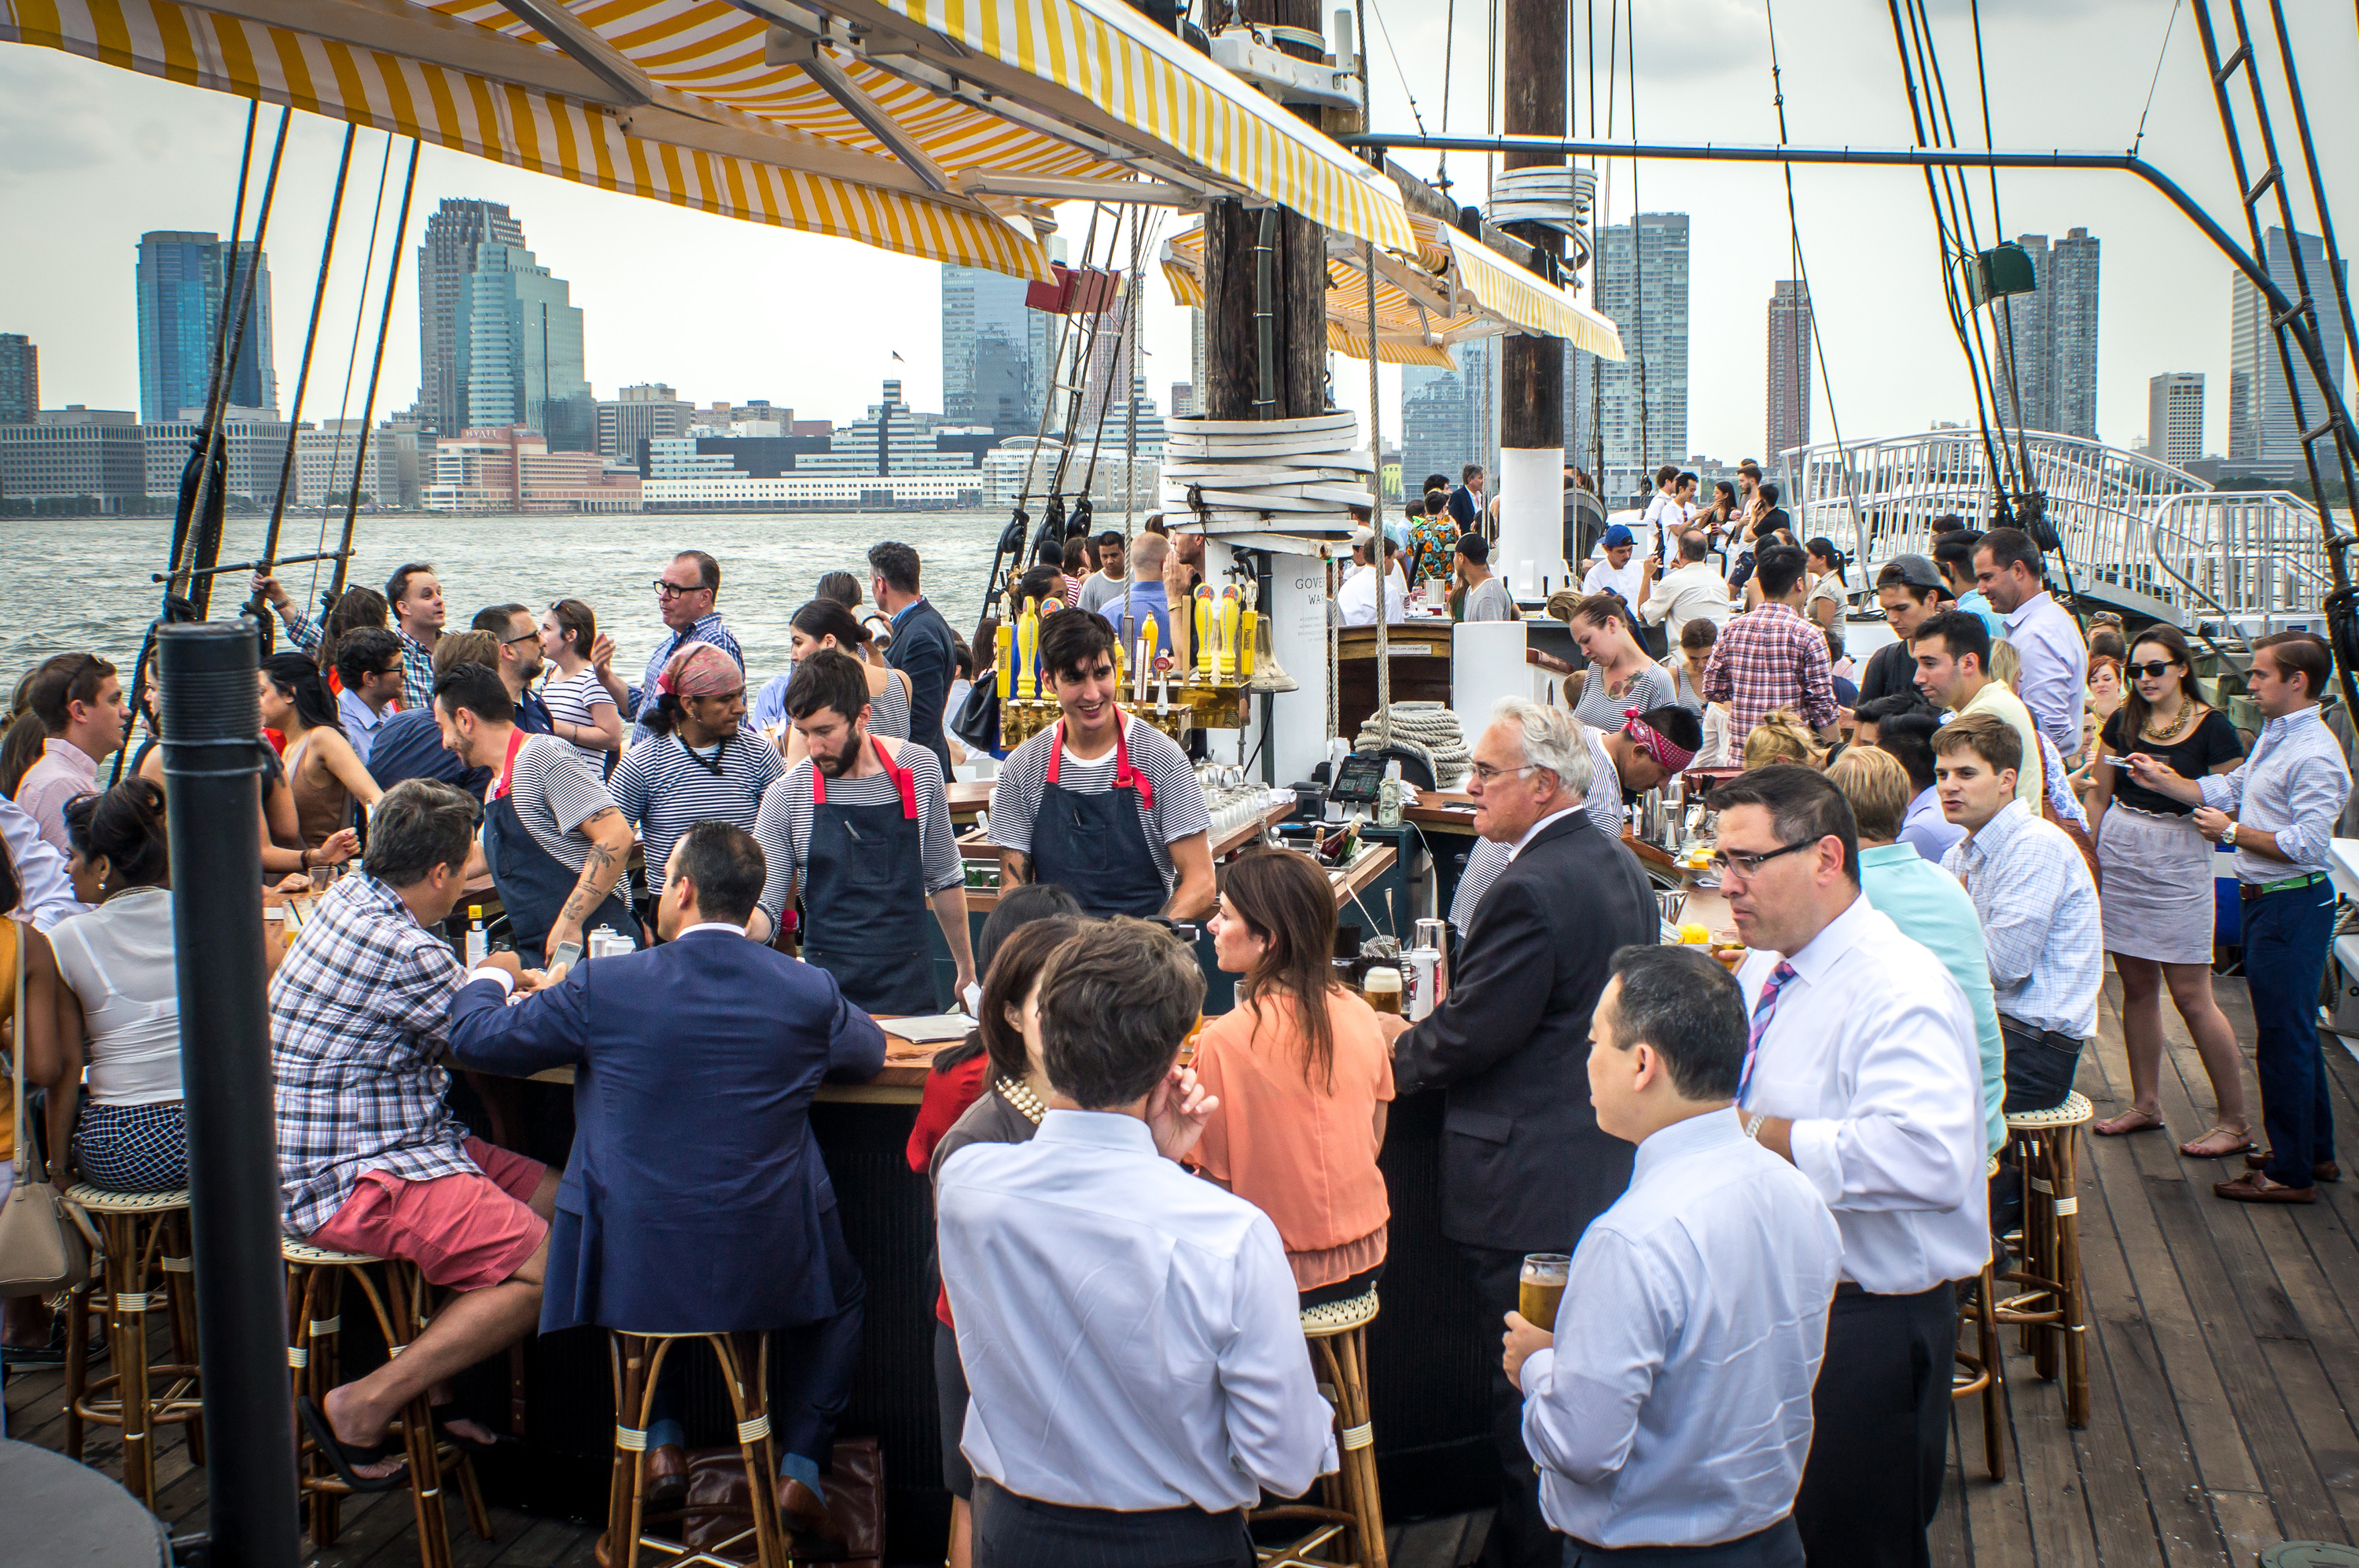 Floating bar Grand Banks cruises in for another New York summer